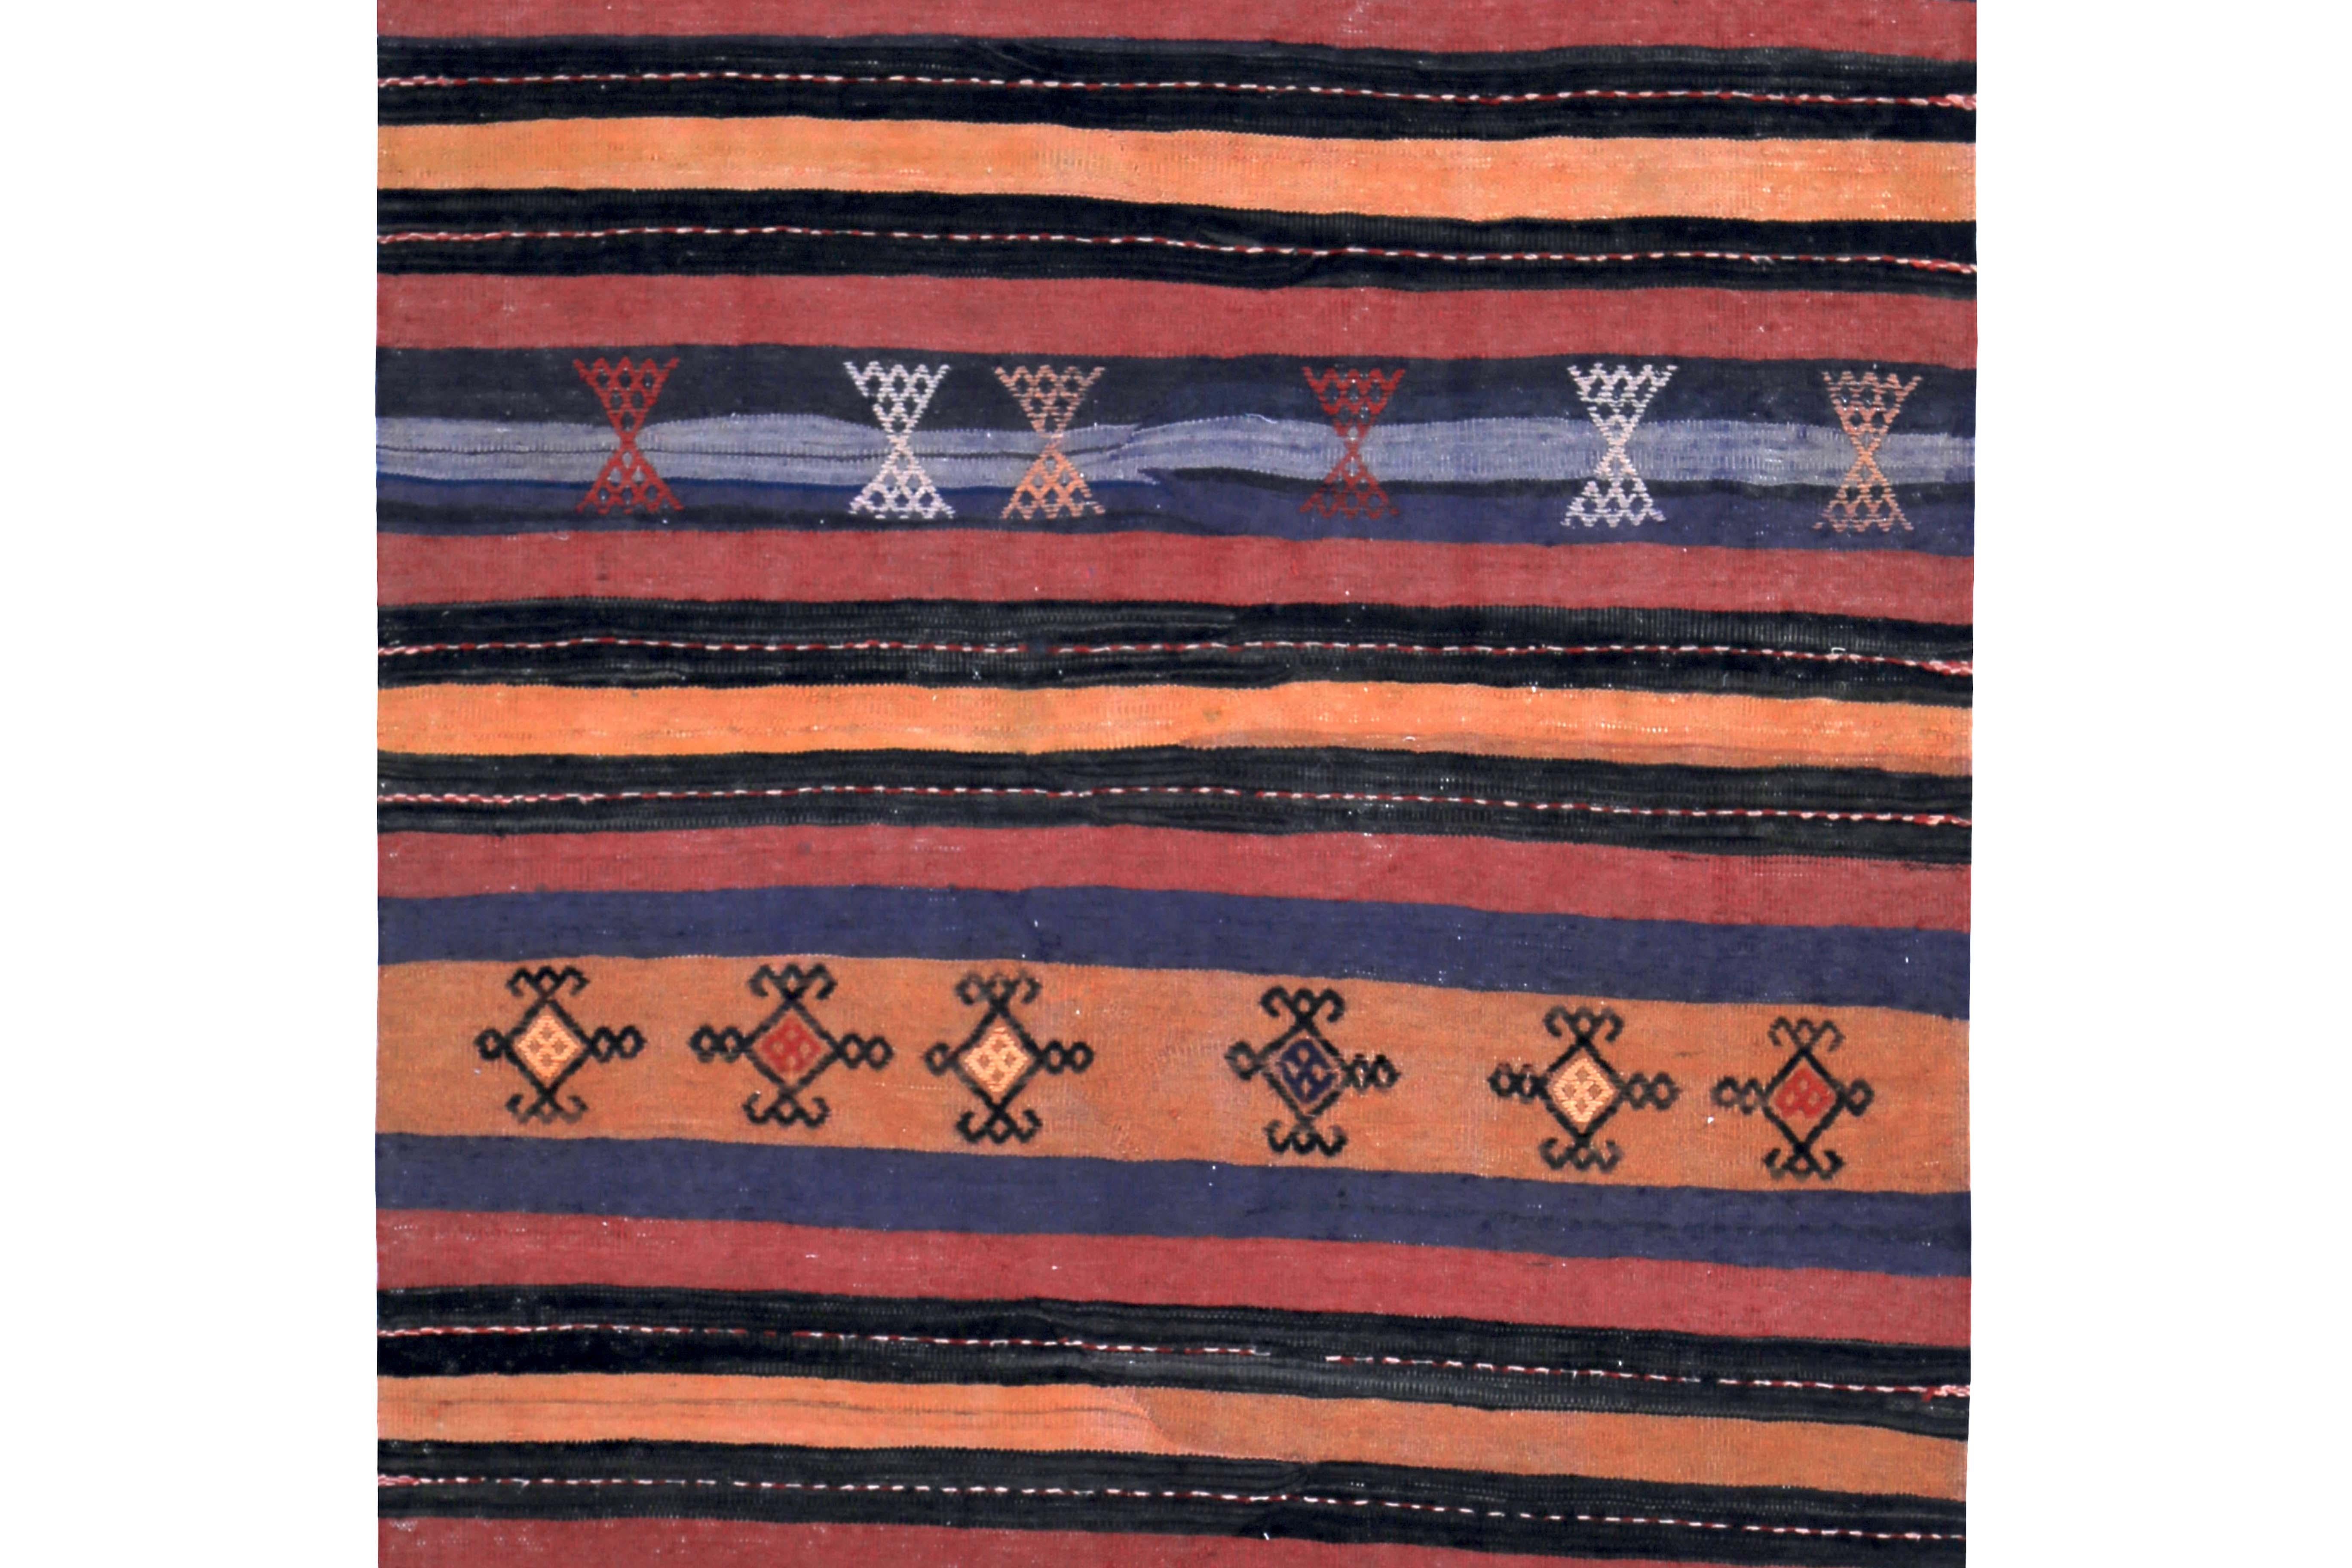 Hand-Woven Turkish Kilim Runner Rug with Orange, Blue, Red and Black Tribal Diamonds For Sale